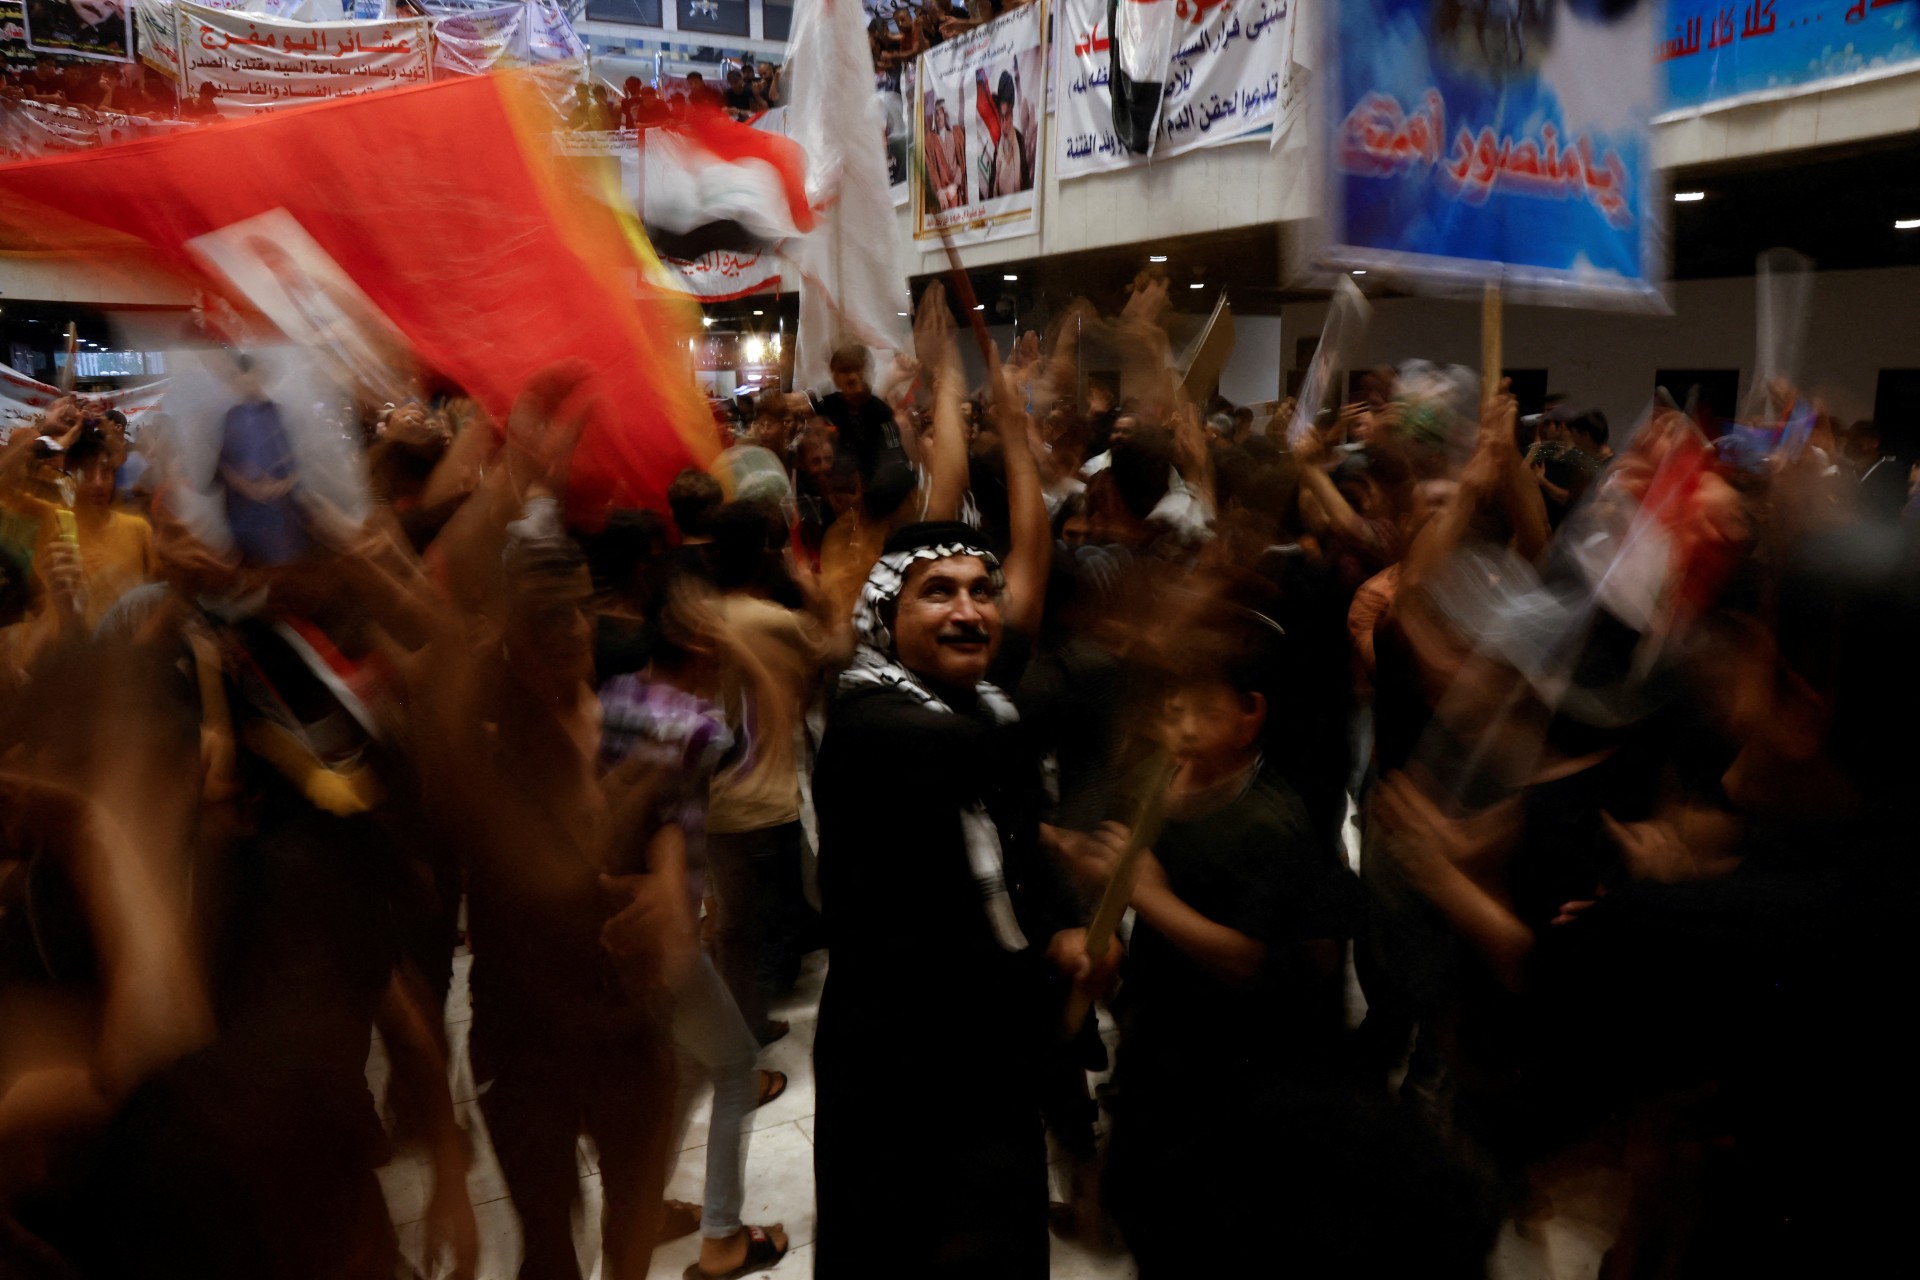 Supporters of Muqtada al-Sadr gather during a sit-in at the parliament building in Baghdad, 3 August (Reuters)